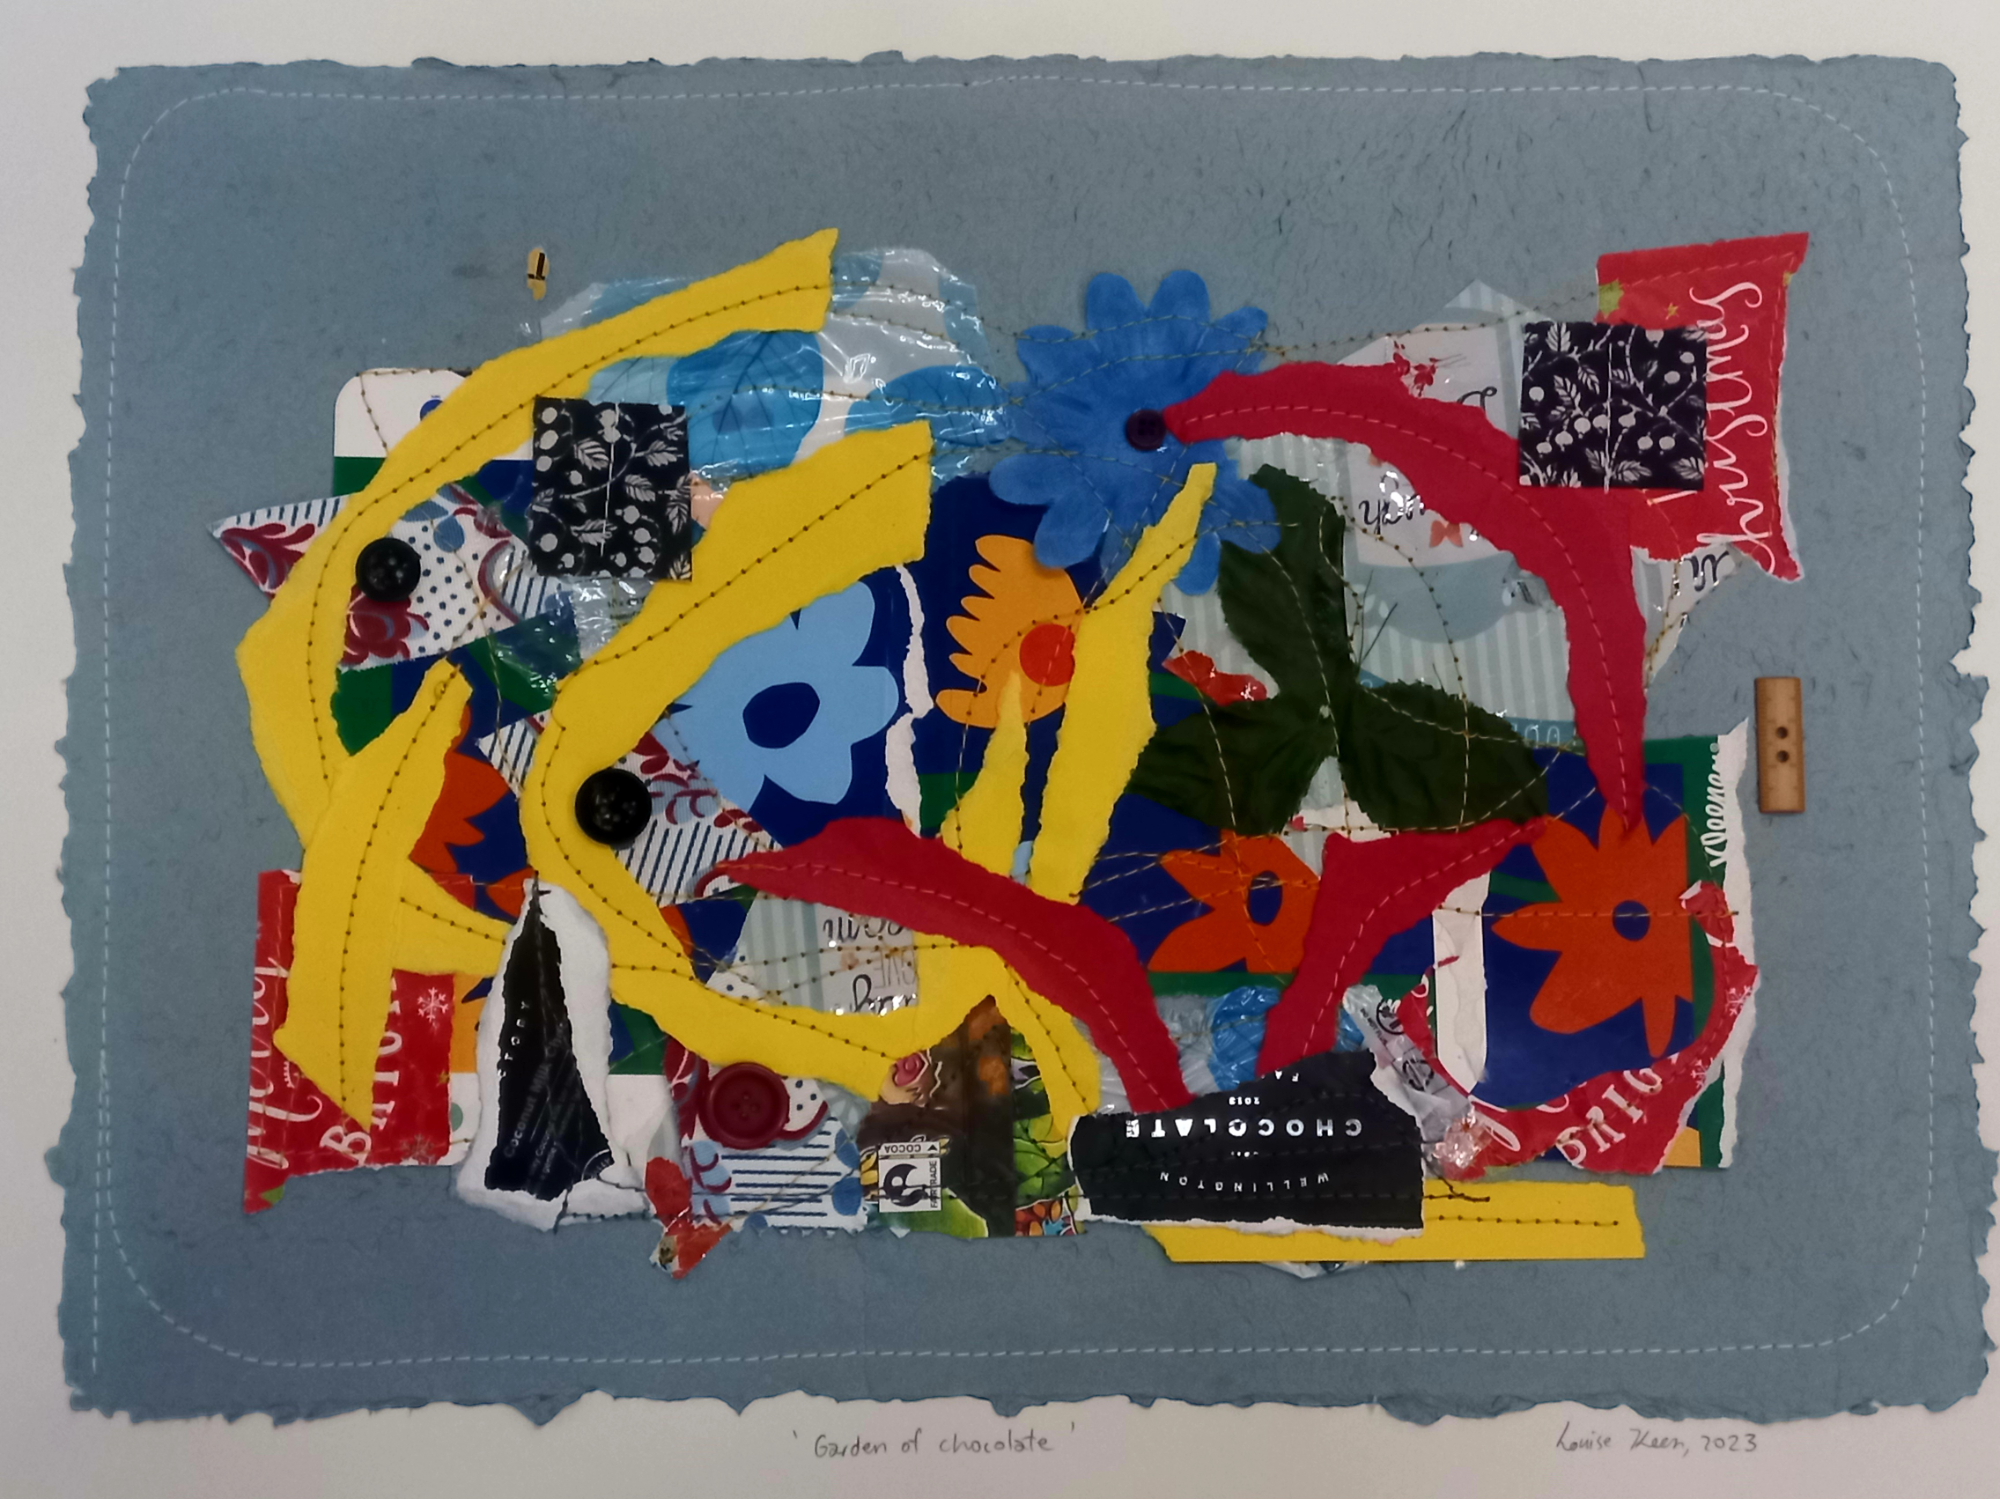 A vibrant and colorful mixed media collage featuring abstract floral shapes, various patterns, and dynamic forms, all creatively assembled on a blue textured background made of handmade paper, complete with a title and artist's signature by Louise Keen's Garden of Chocolate.